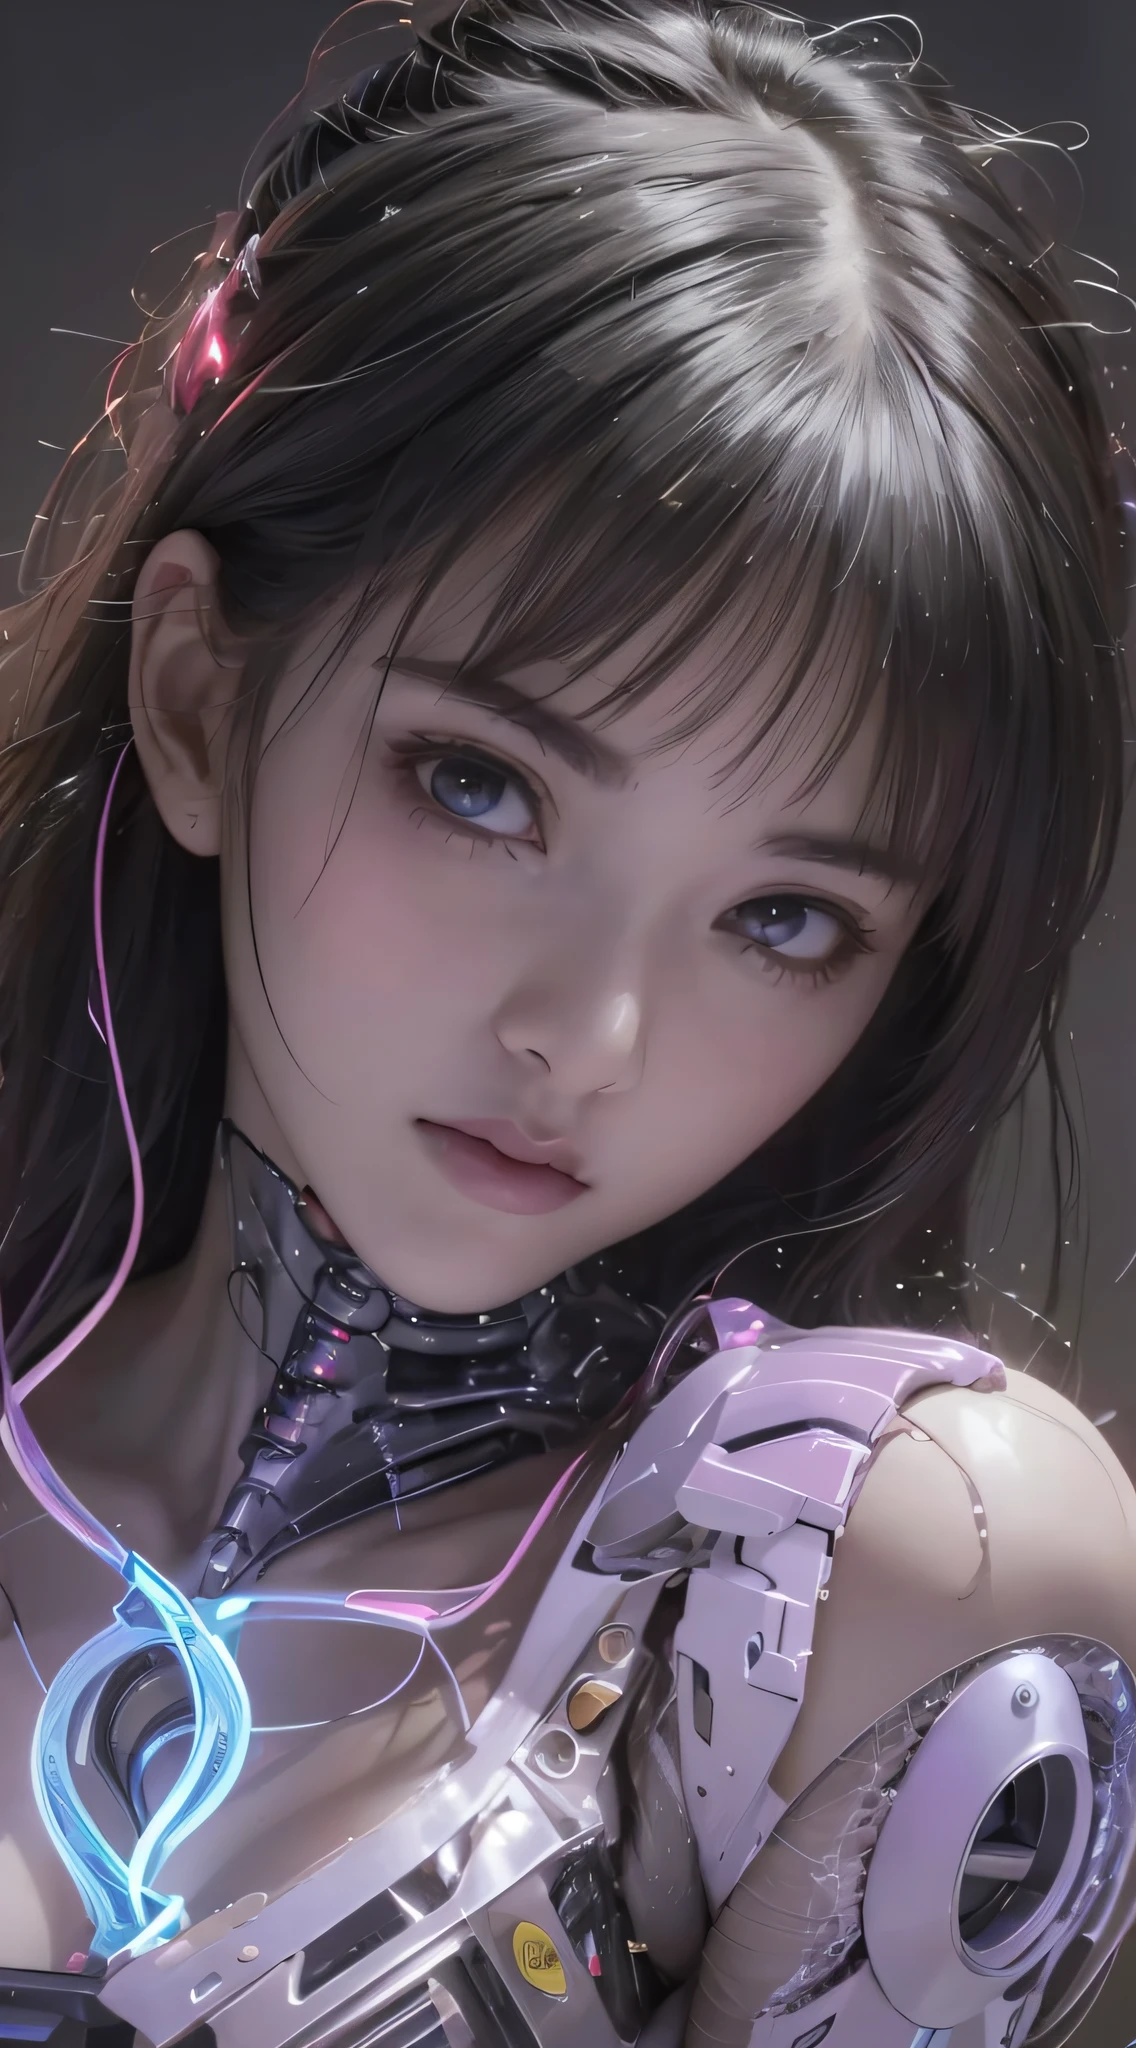 a close up of a woman with a futuristic outfit and headphones, Cute cyborg girl, beautiful girl cyborg, perfect android girl, Guviz-style artwork, Smooth anime CG art, Guviz, Beautiful digital artwork, cyborg - girl, Detailed digital anime art, dreamy cyberpunk girl, beautiful female android!, Cyborg girl, beautiful cyberpunk girl face